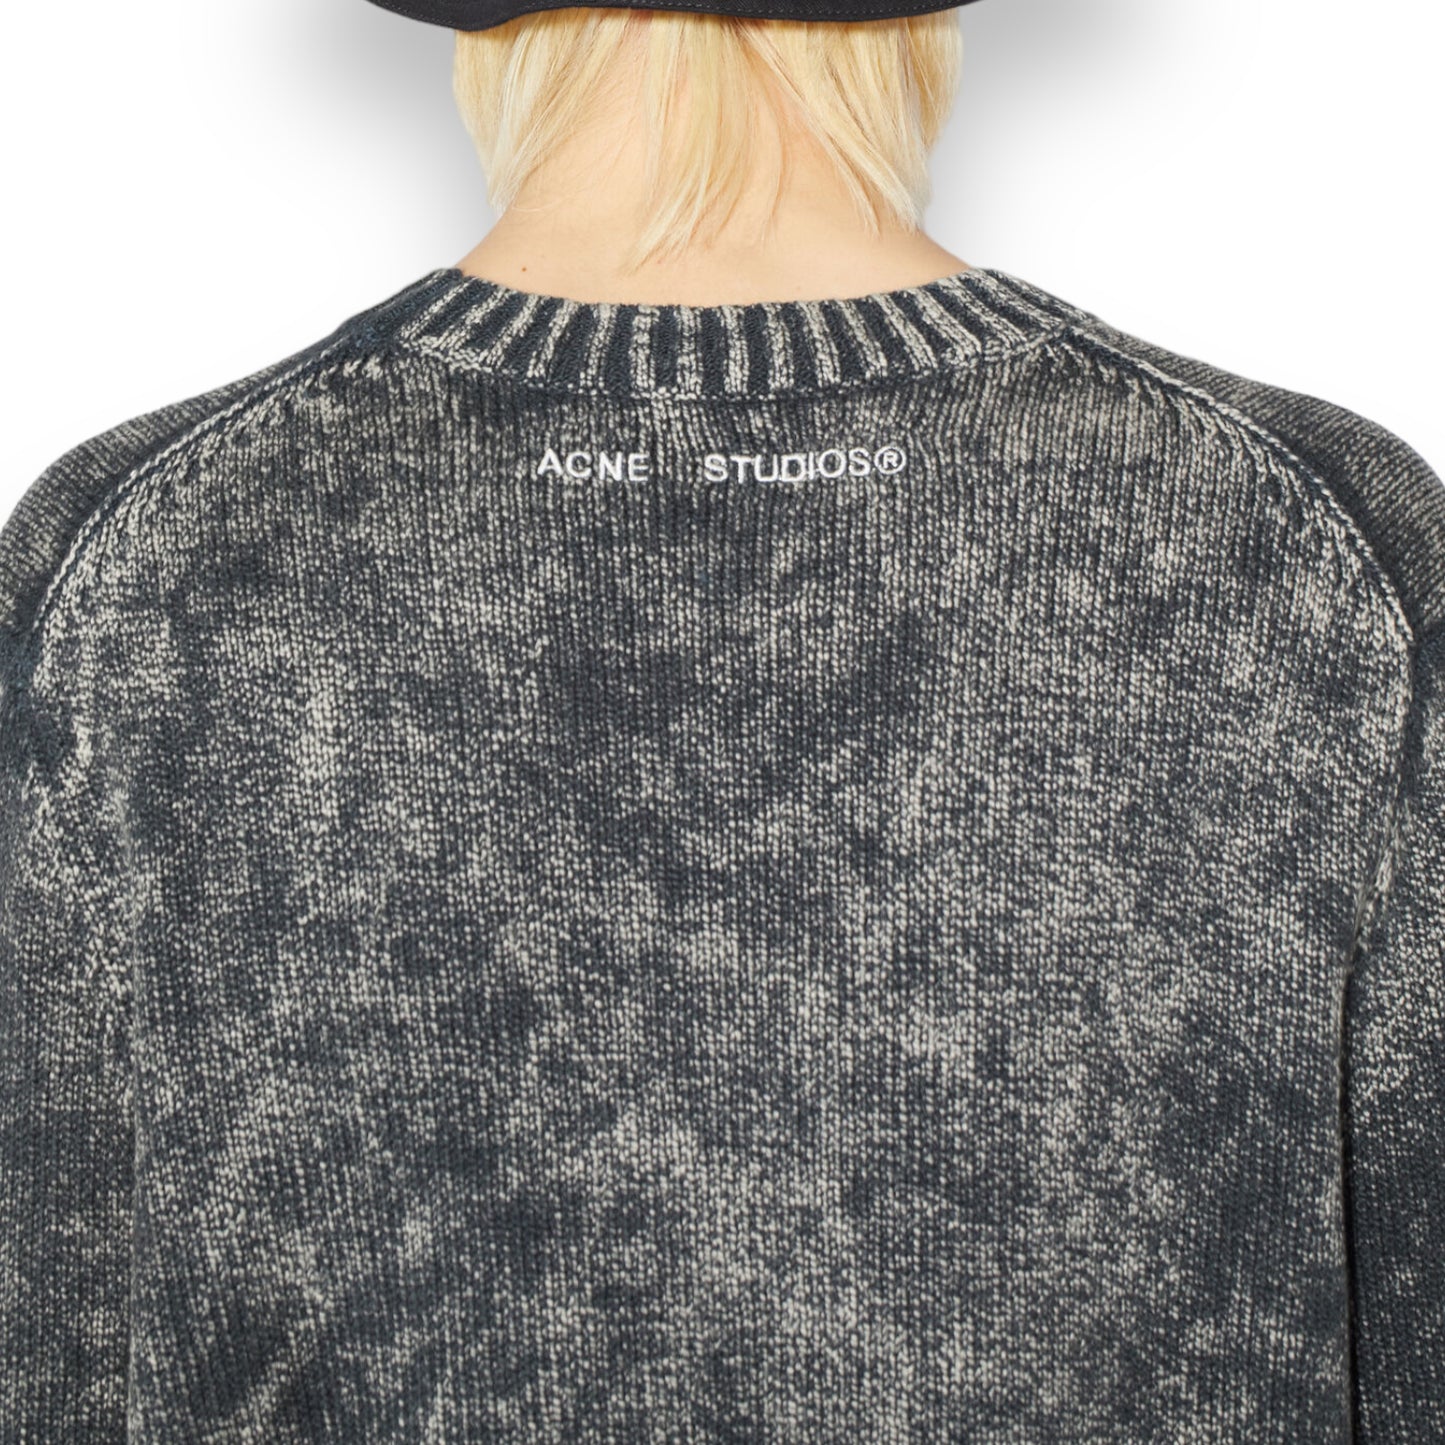 Acne Studios Knitted Sweater